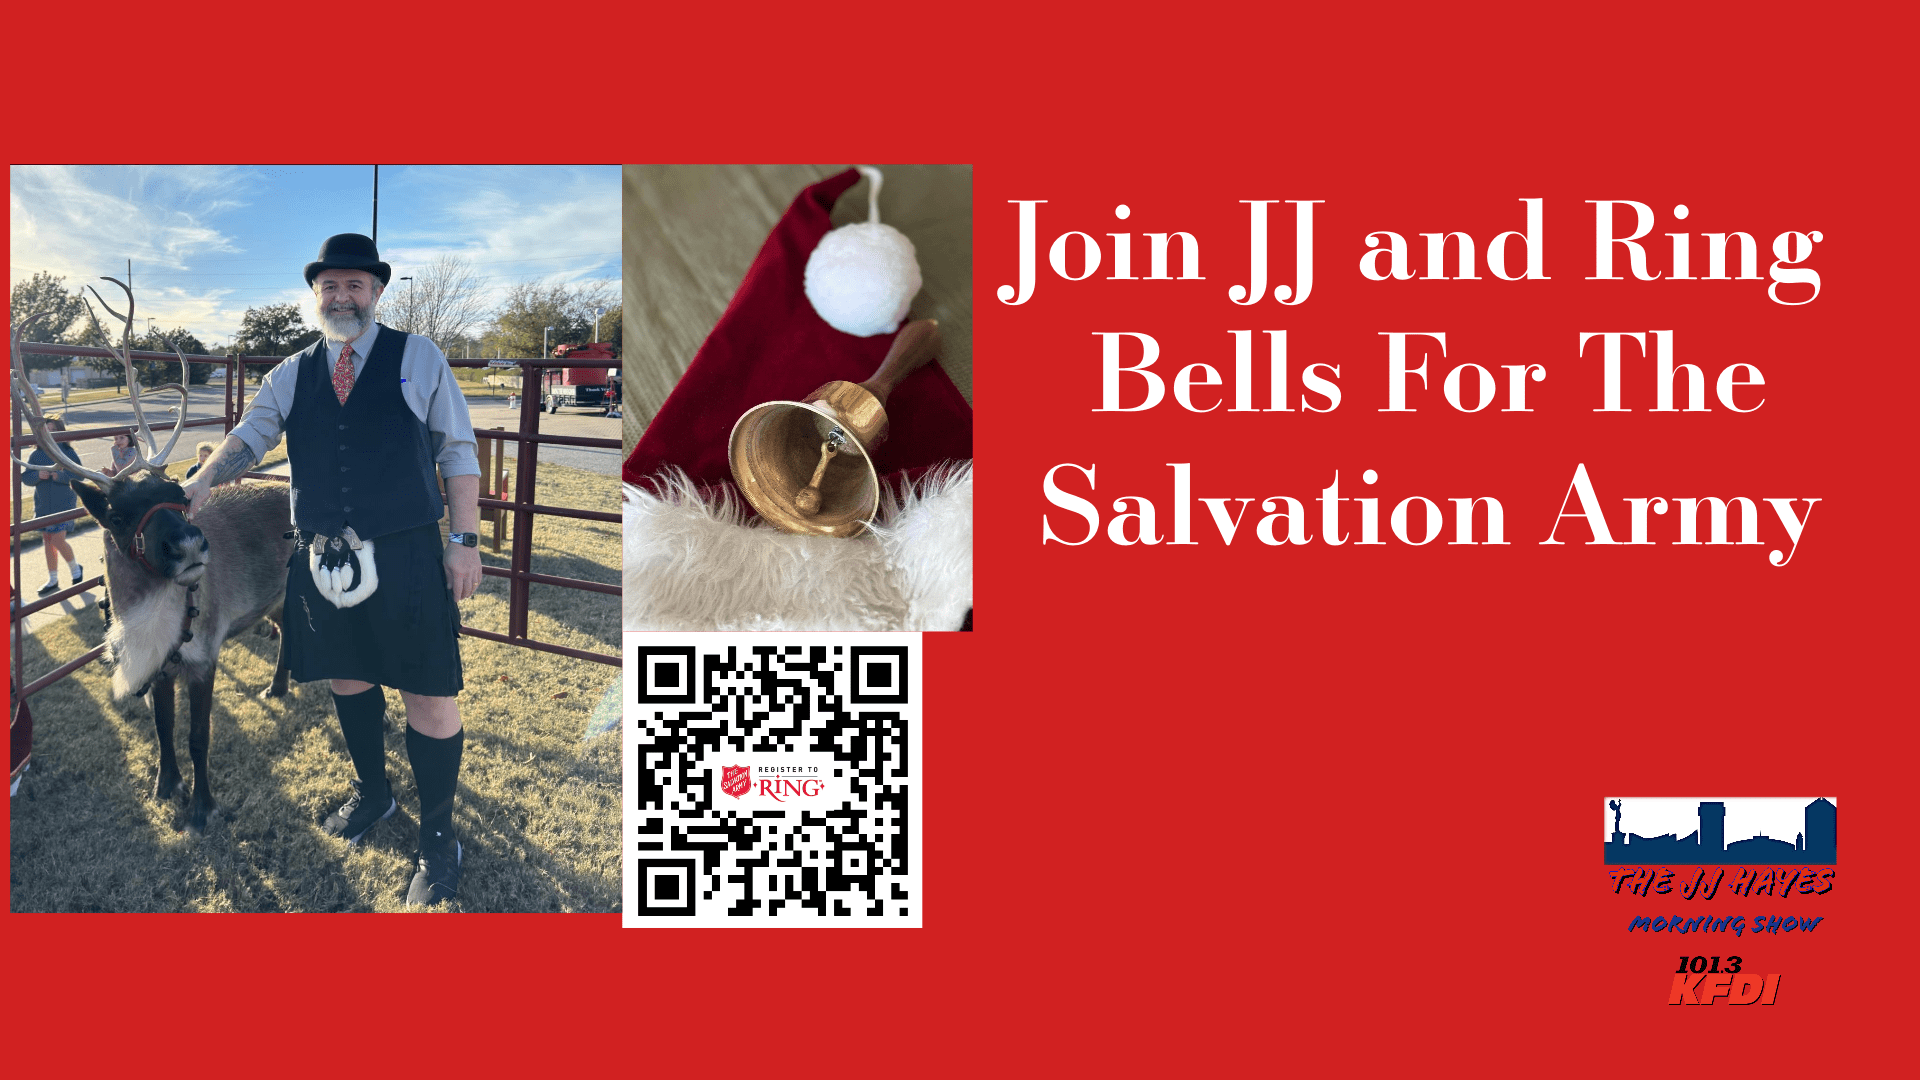 Salvation Army in Tyler in need of bell ringers – United Way of Smith County